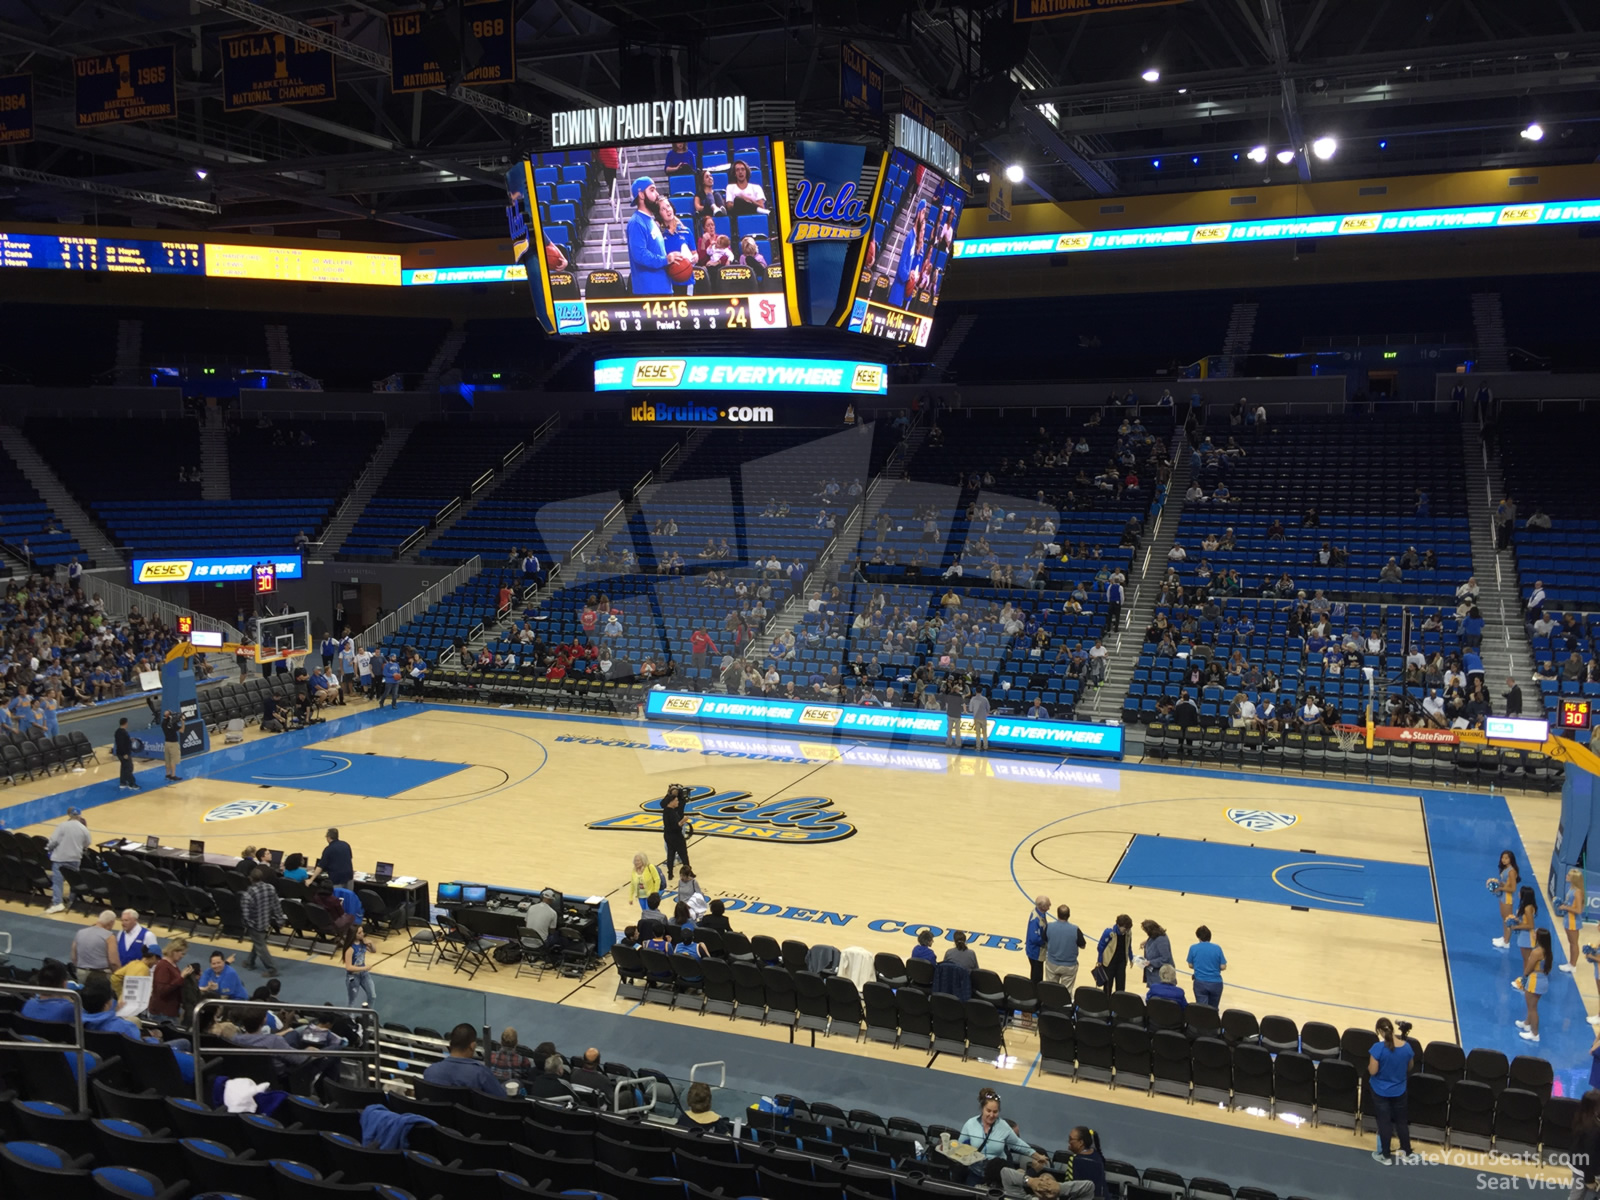 section 114, row 13 seat view  - pauley pavilion